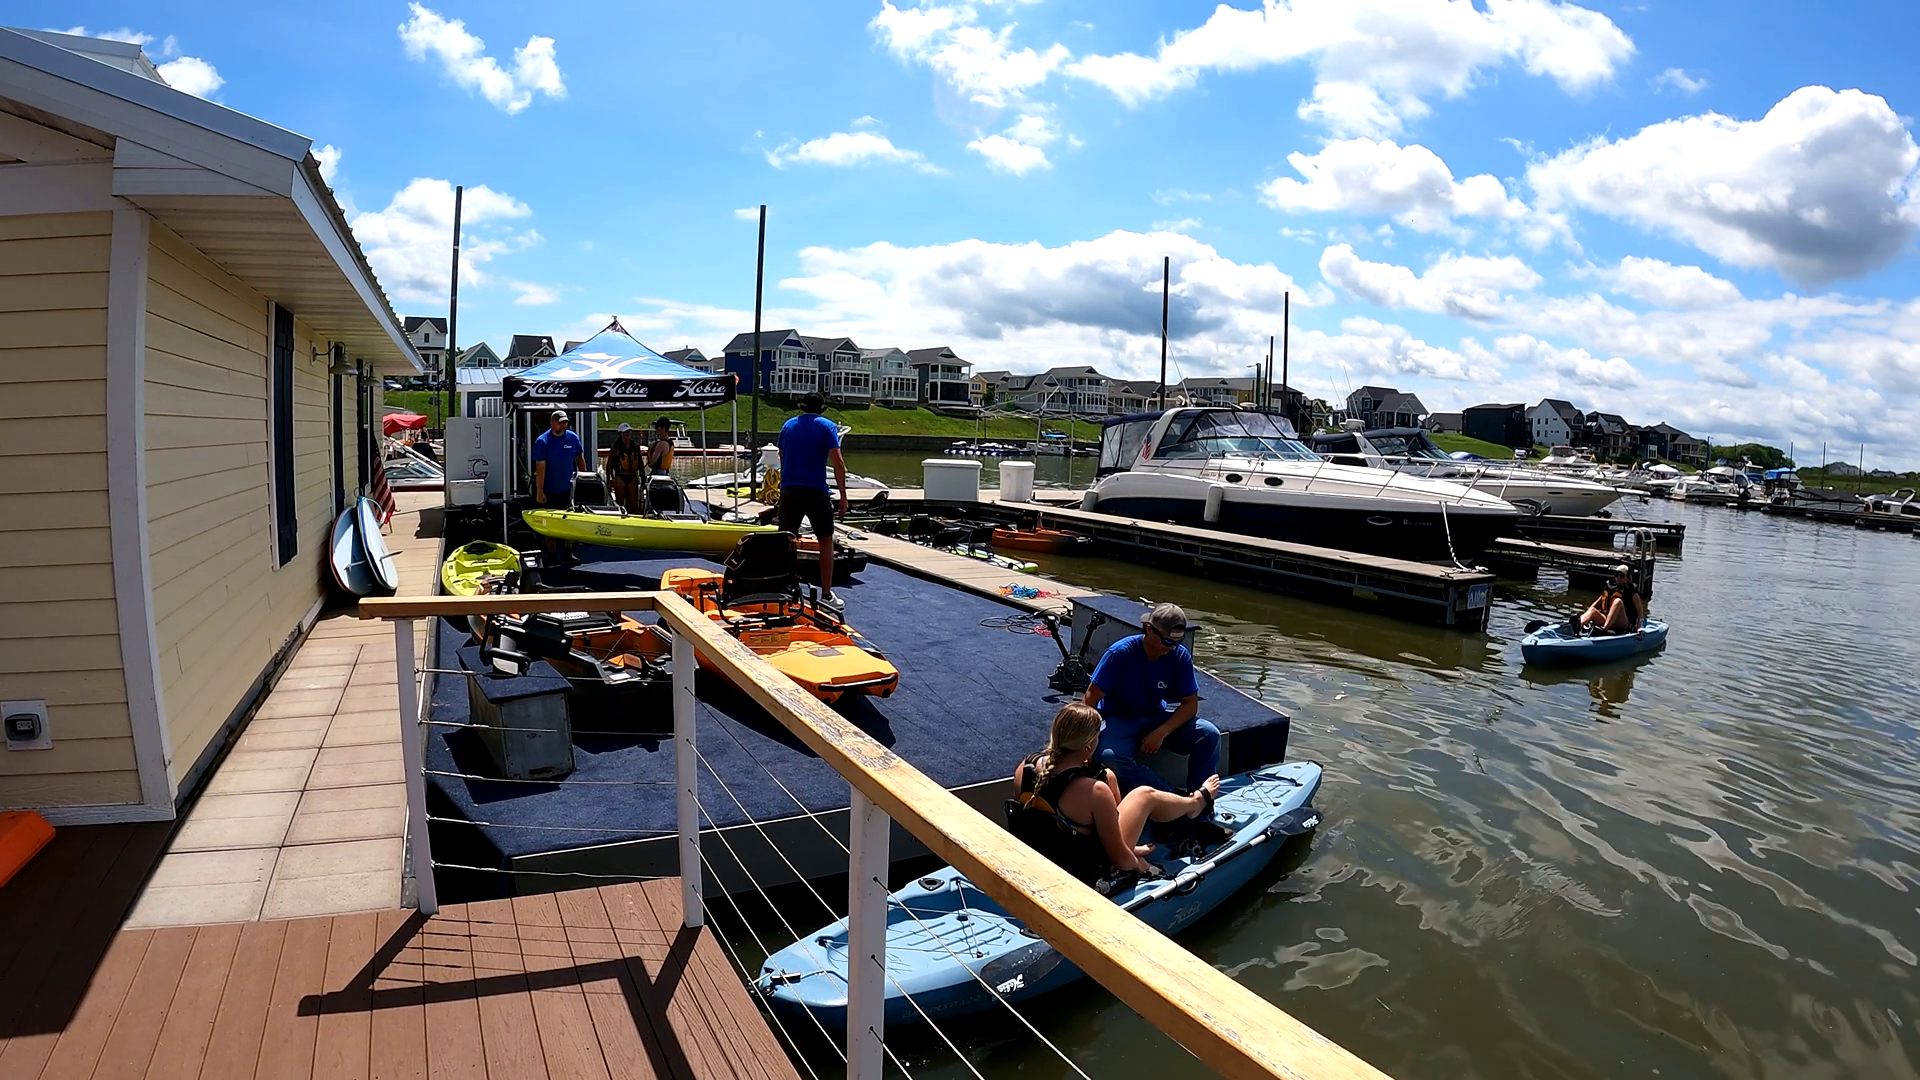 Demo Kayaks Being Launched at the Quest Watersports Kayak Dock at Heritage Harbor